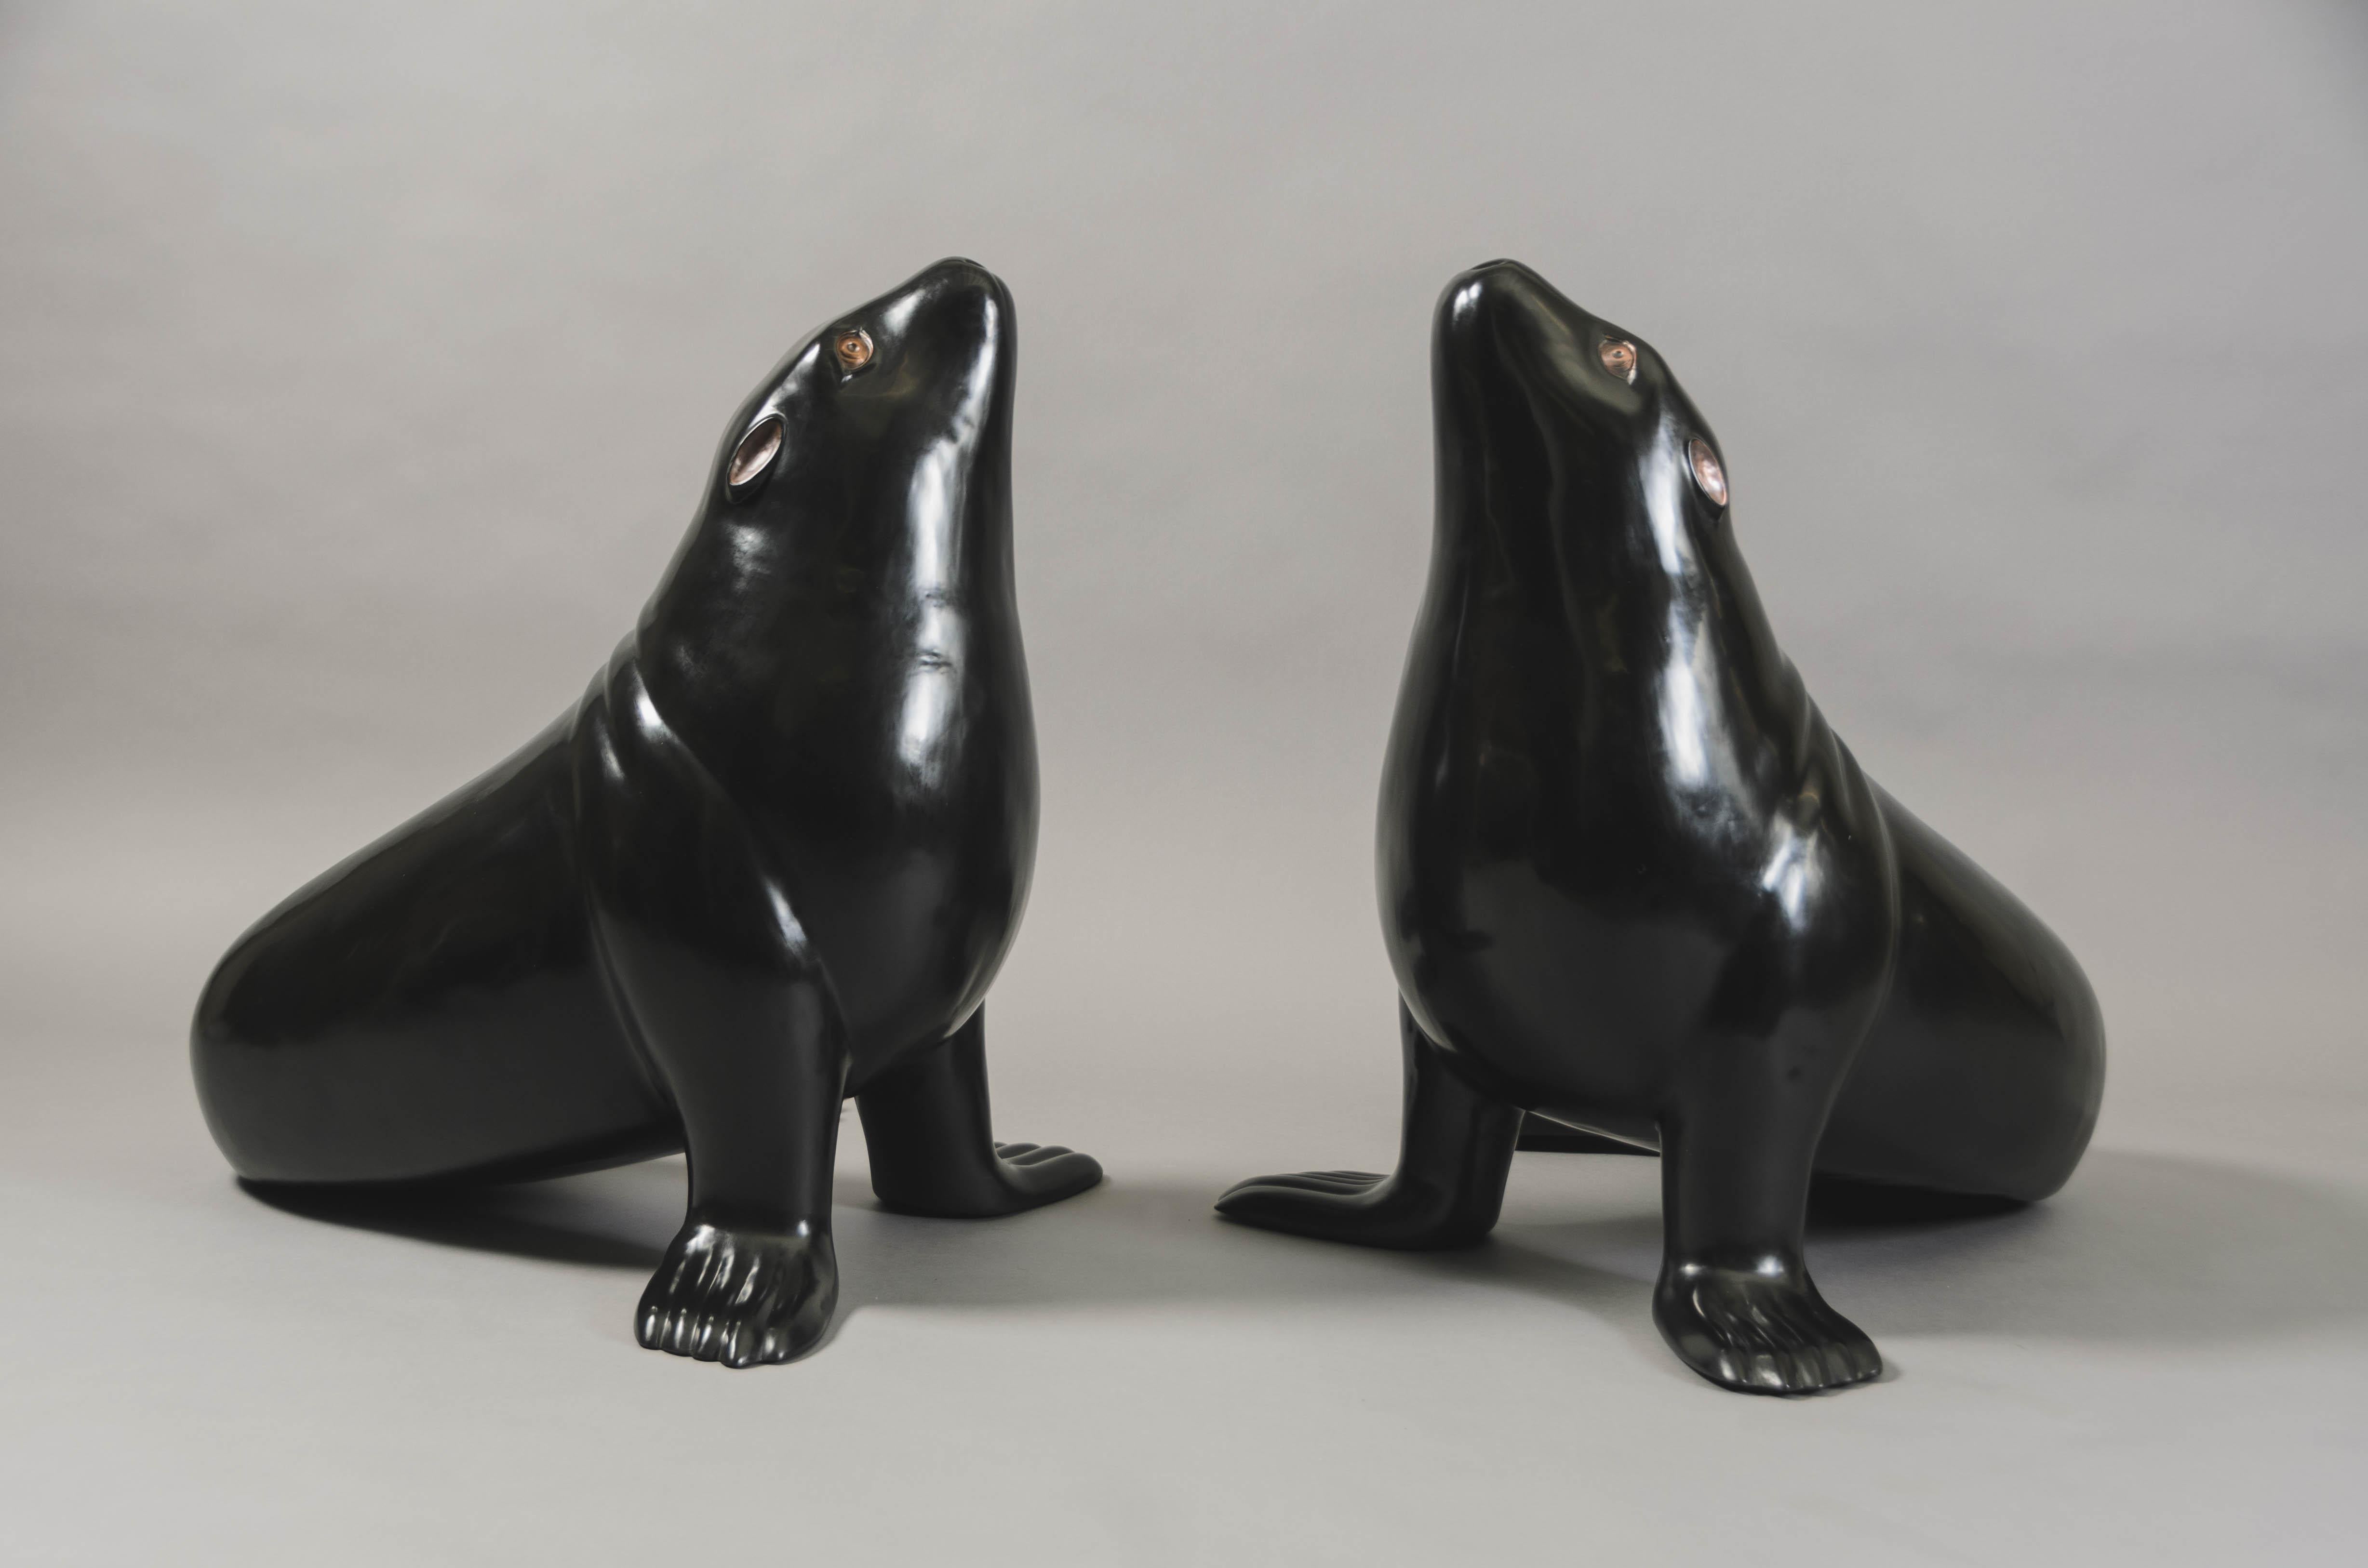 Modern Contemporary Black Lacquer Sea Lion Sculpture by Robert Kuo, Limited Edition For Sale